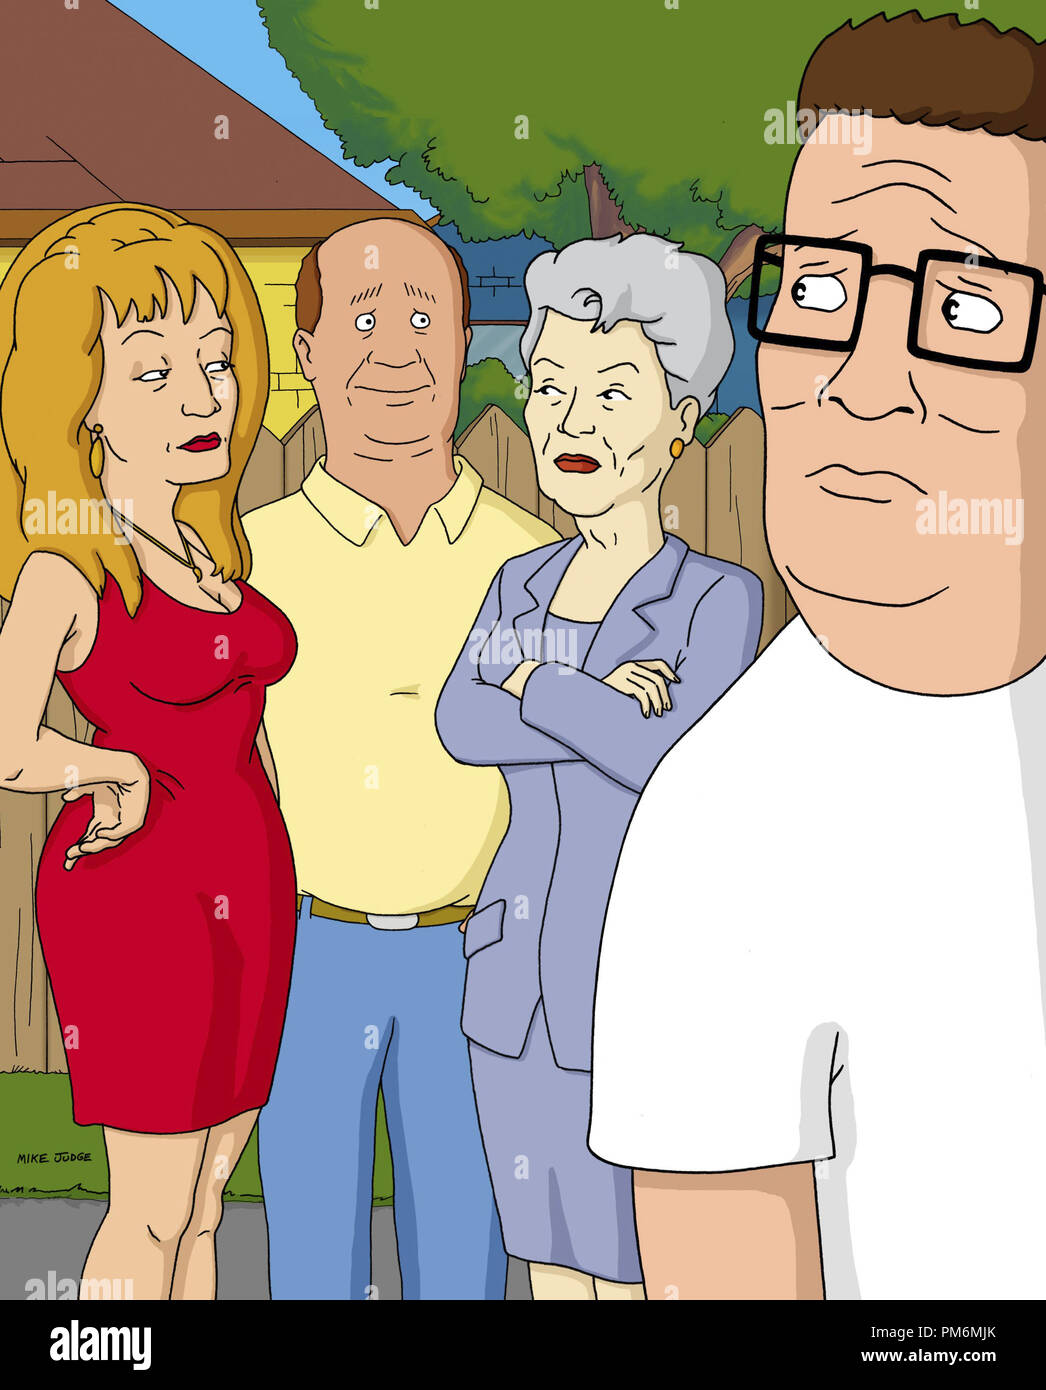 'Hank and The Great Glass Elevator' Lenore, Bill Dauterive, Forme...